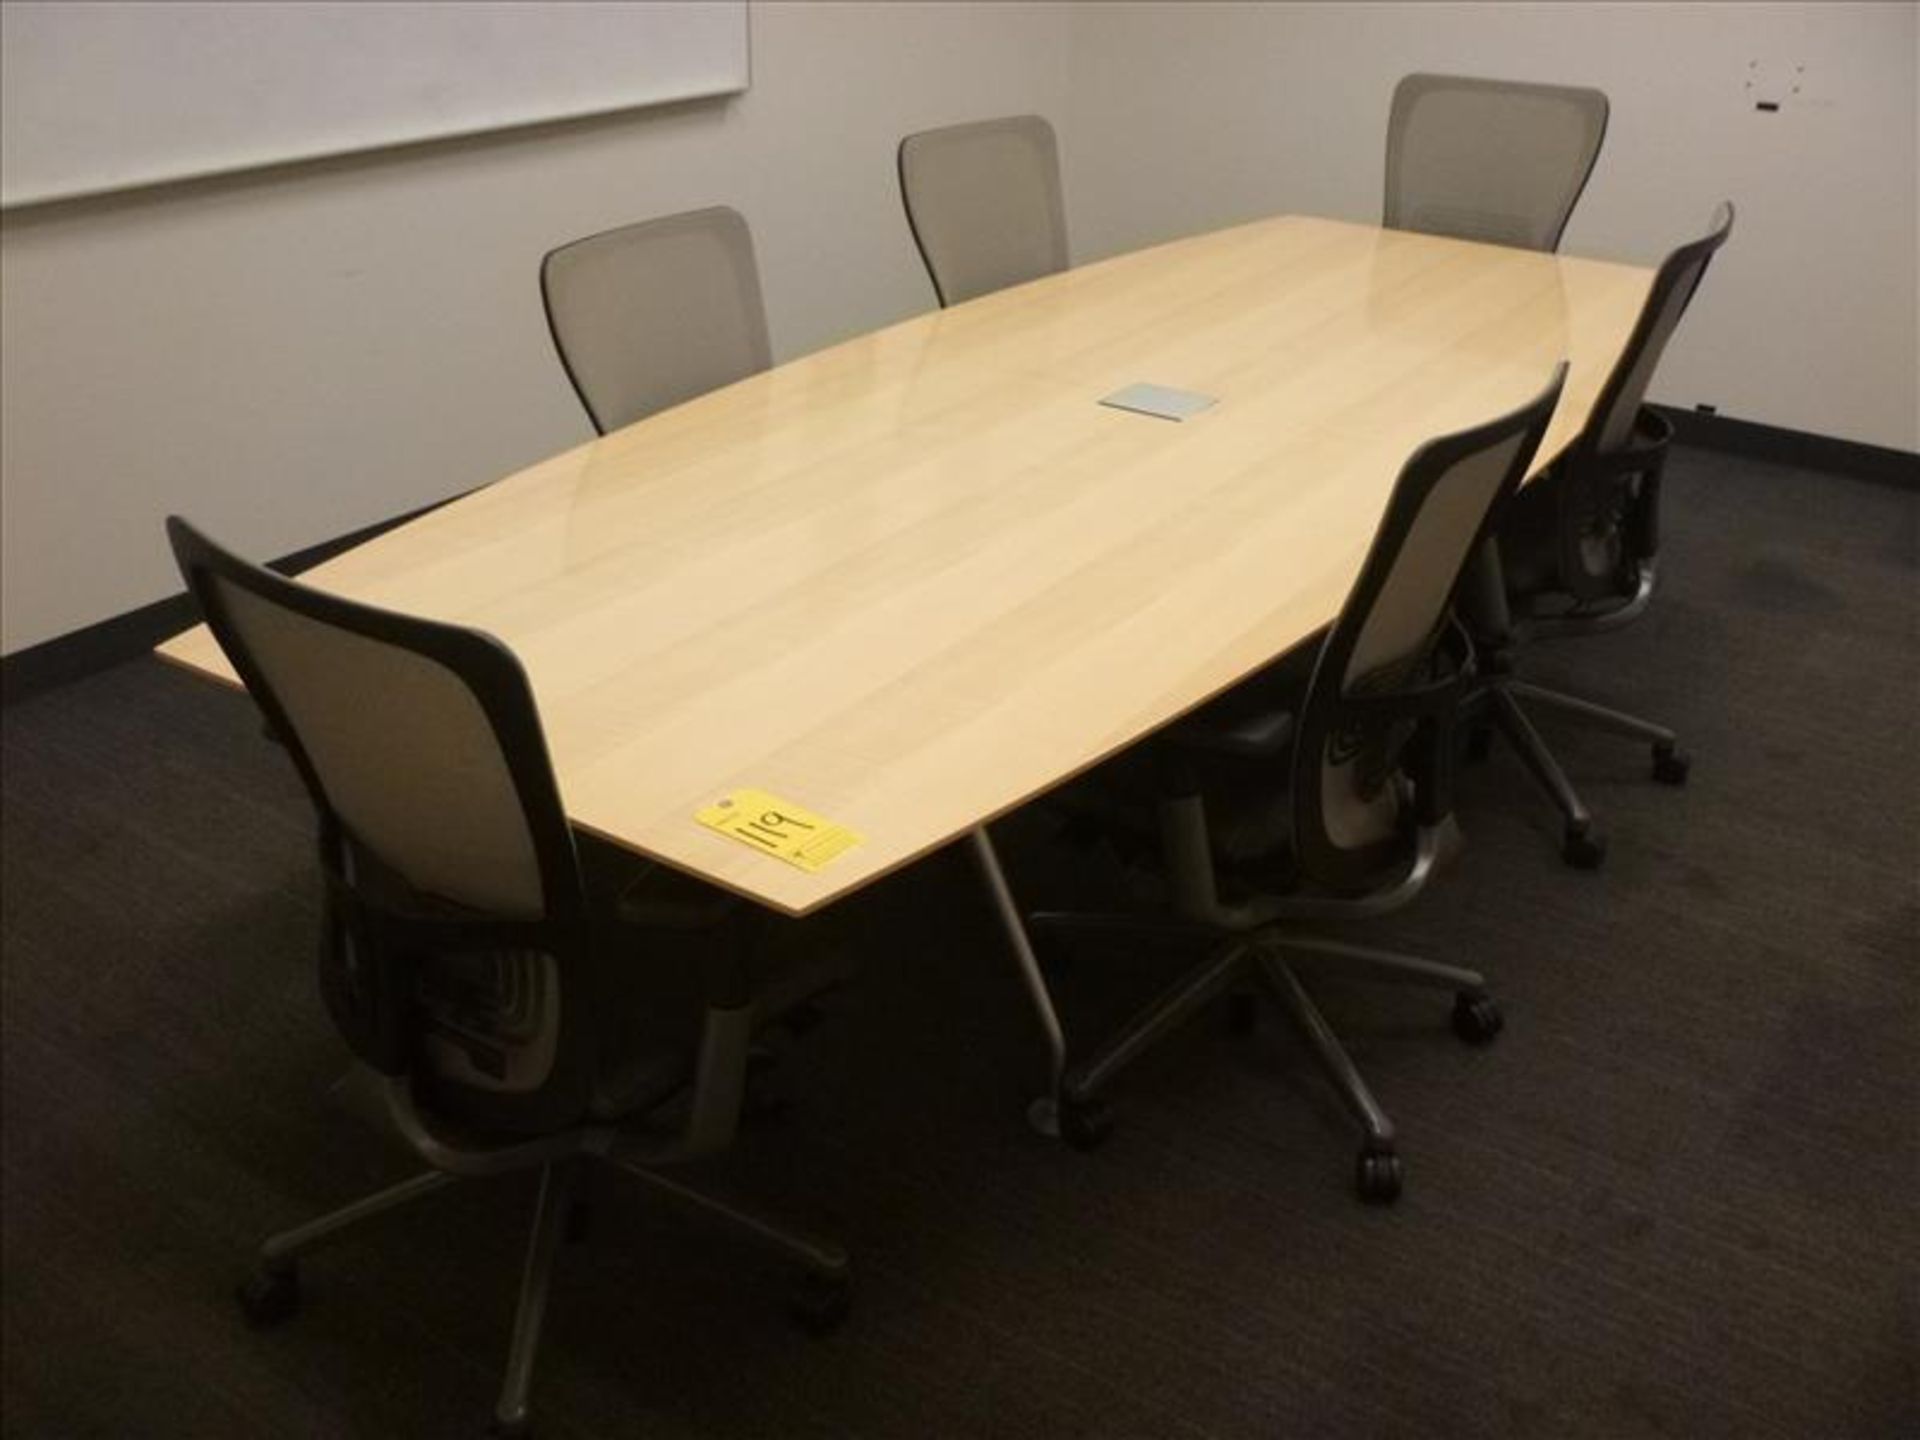 board room table, 4' x 10' c/w (6) chairs [4]